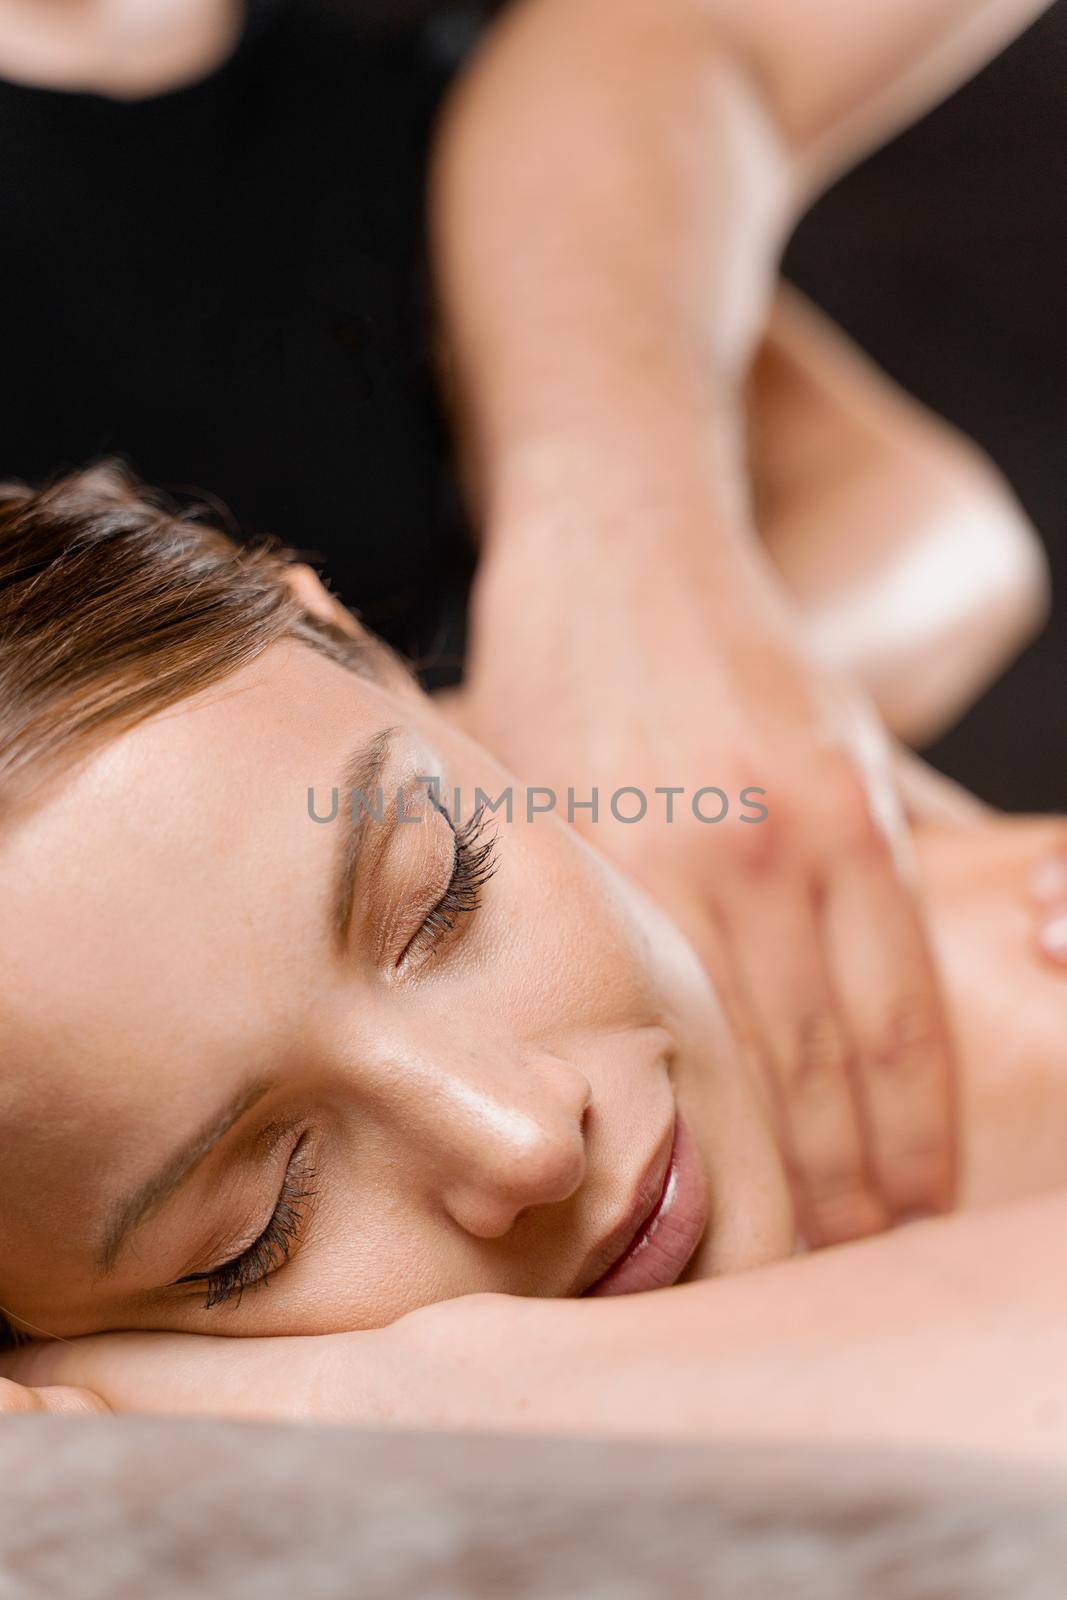 4 hands massage in spa. Two masseurs are making four hands relaxing massage with oil for girl. Relaxation. Manual therapy.